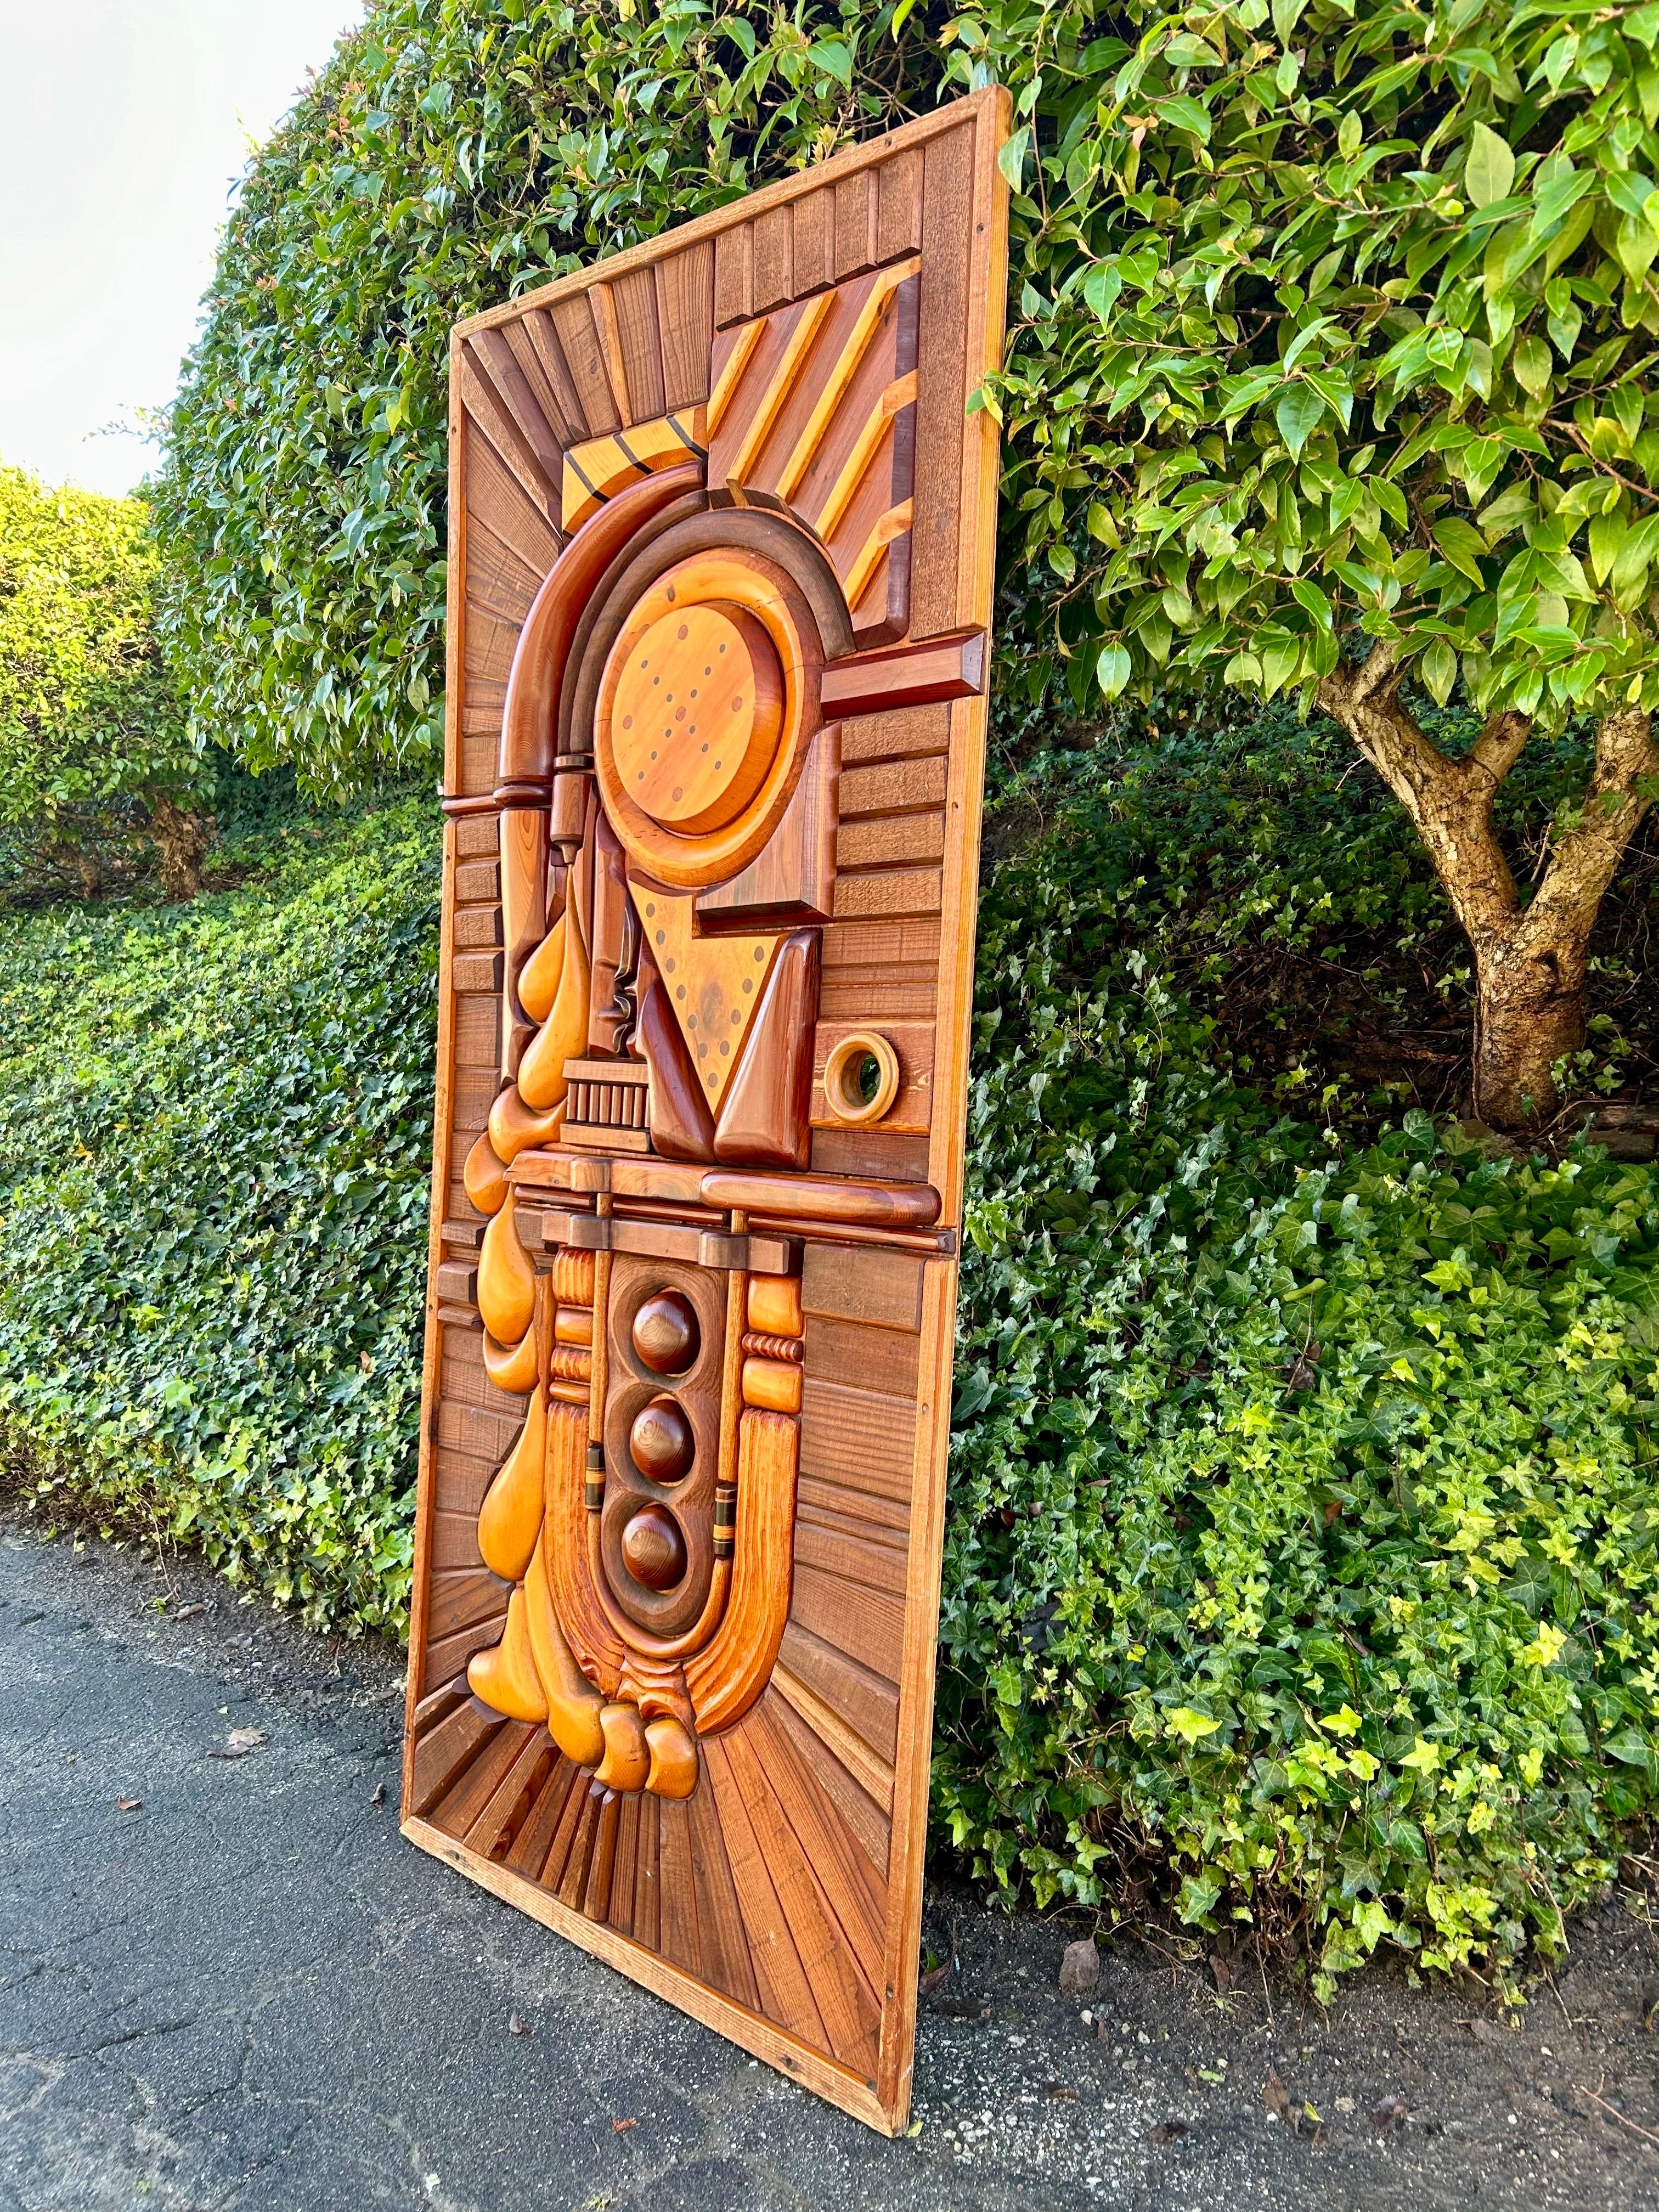 A fun California coast modern art door.
Found in the Laguna Beach area.
Studio made.
Each piece hand made and crafted to fit around each other and juxtaposed to form a cohesive unit on plywood.
Original fine vintage condition, no damage or repairs.